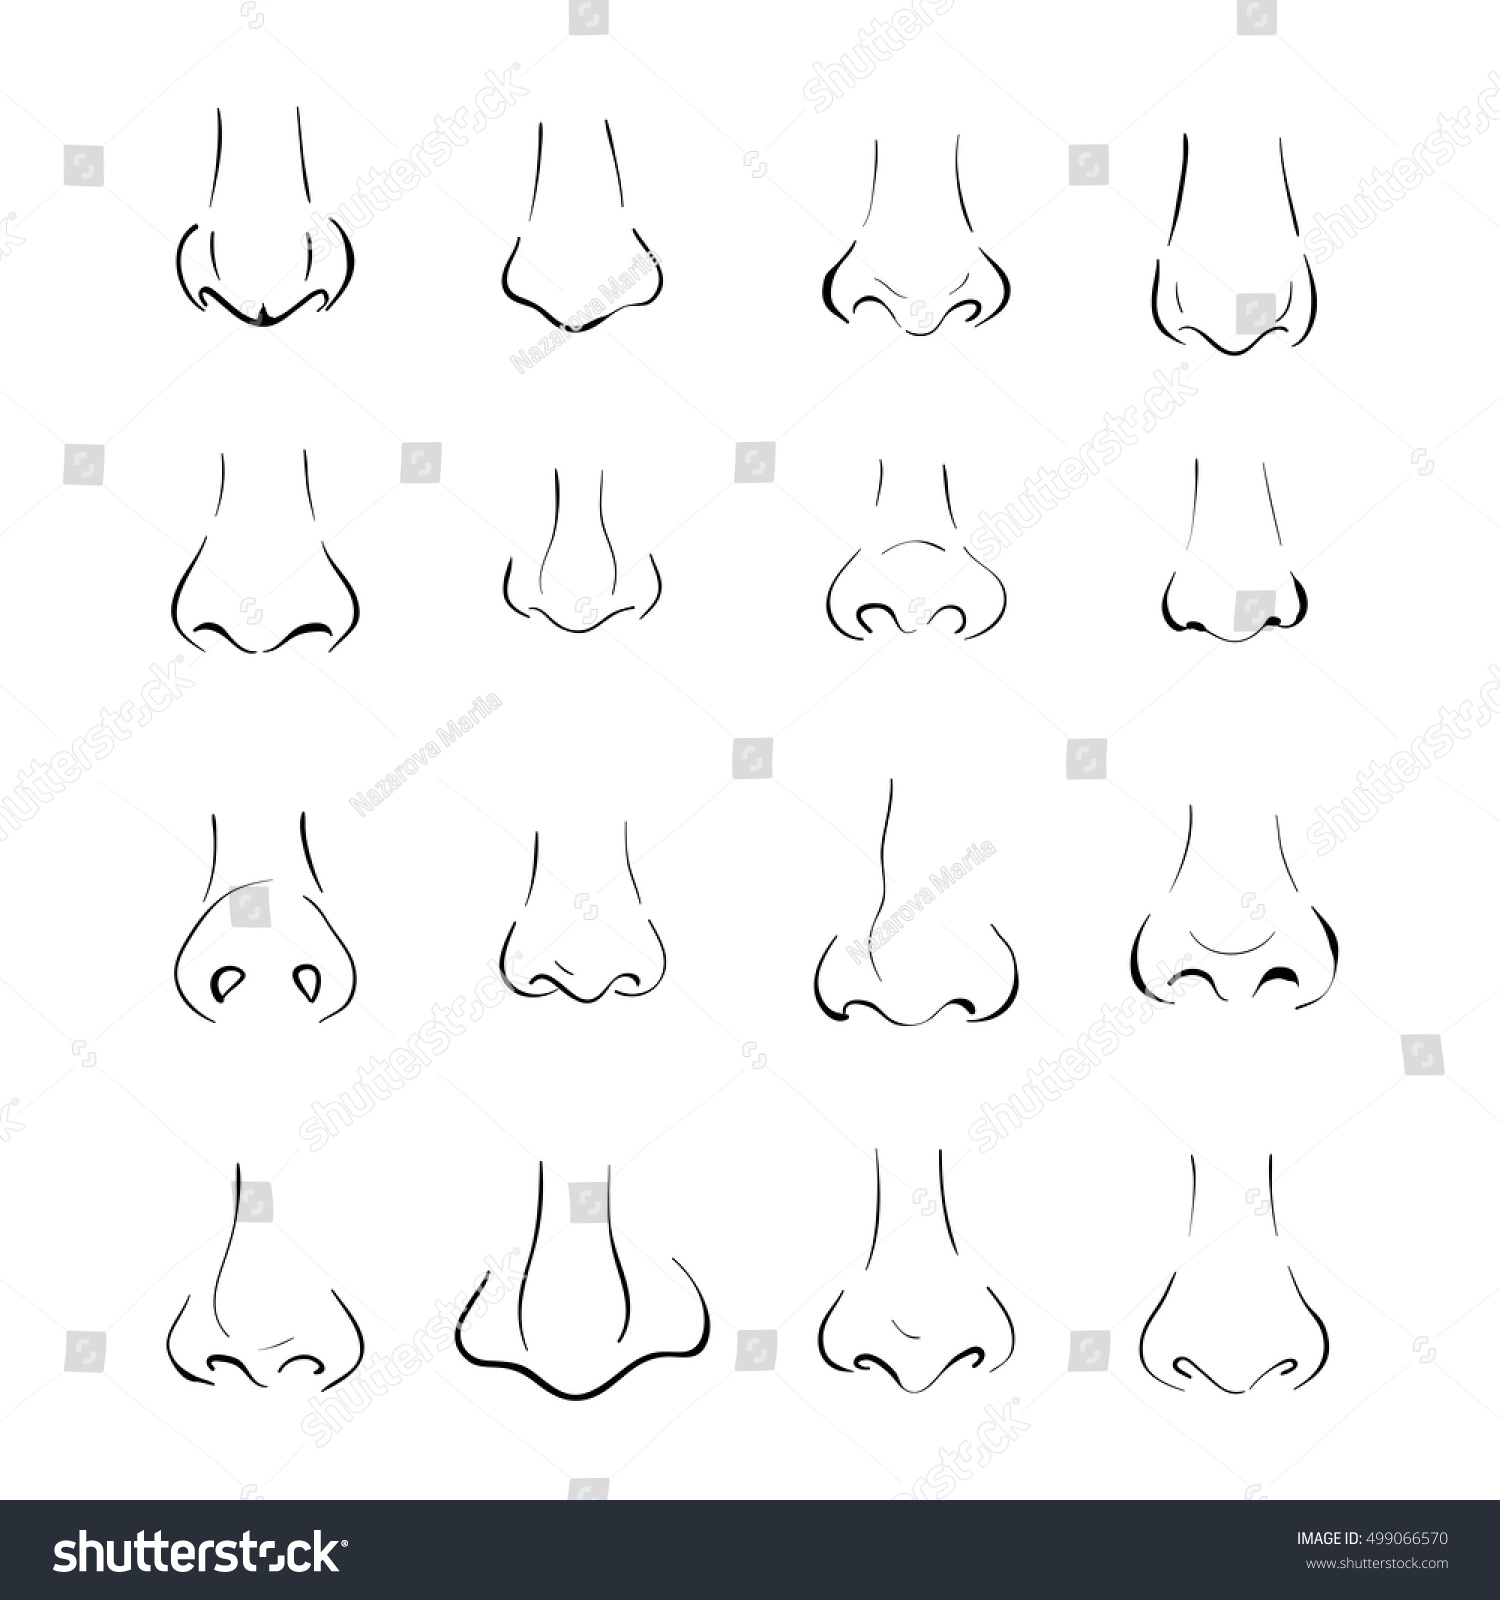 Different Types Of Nose Sketches Chelss Chapman